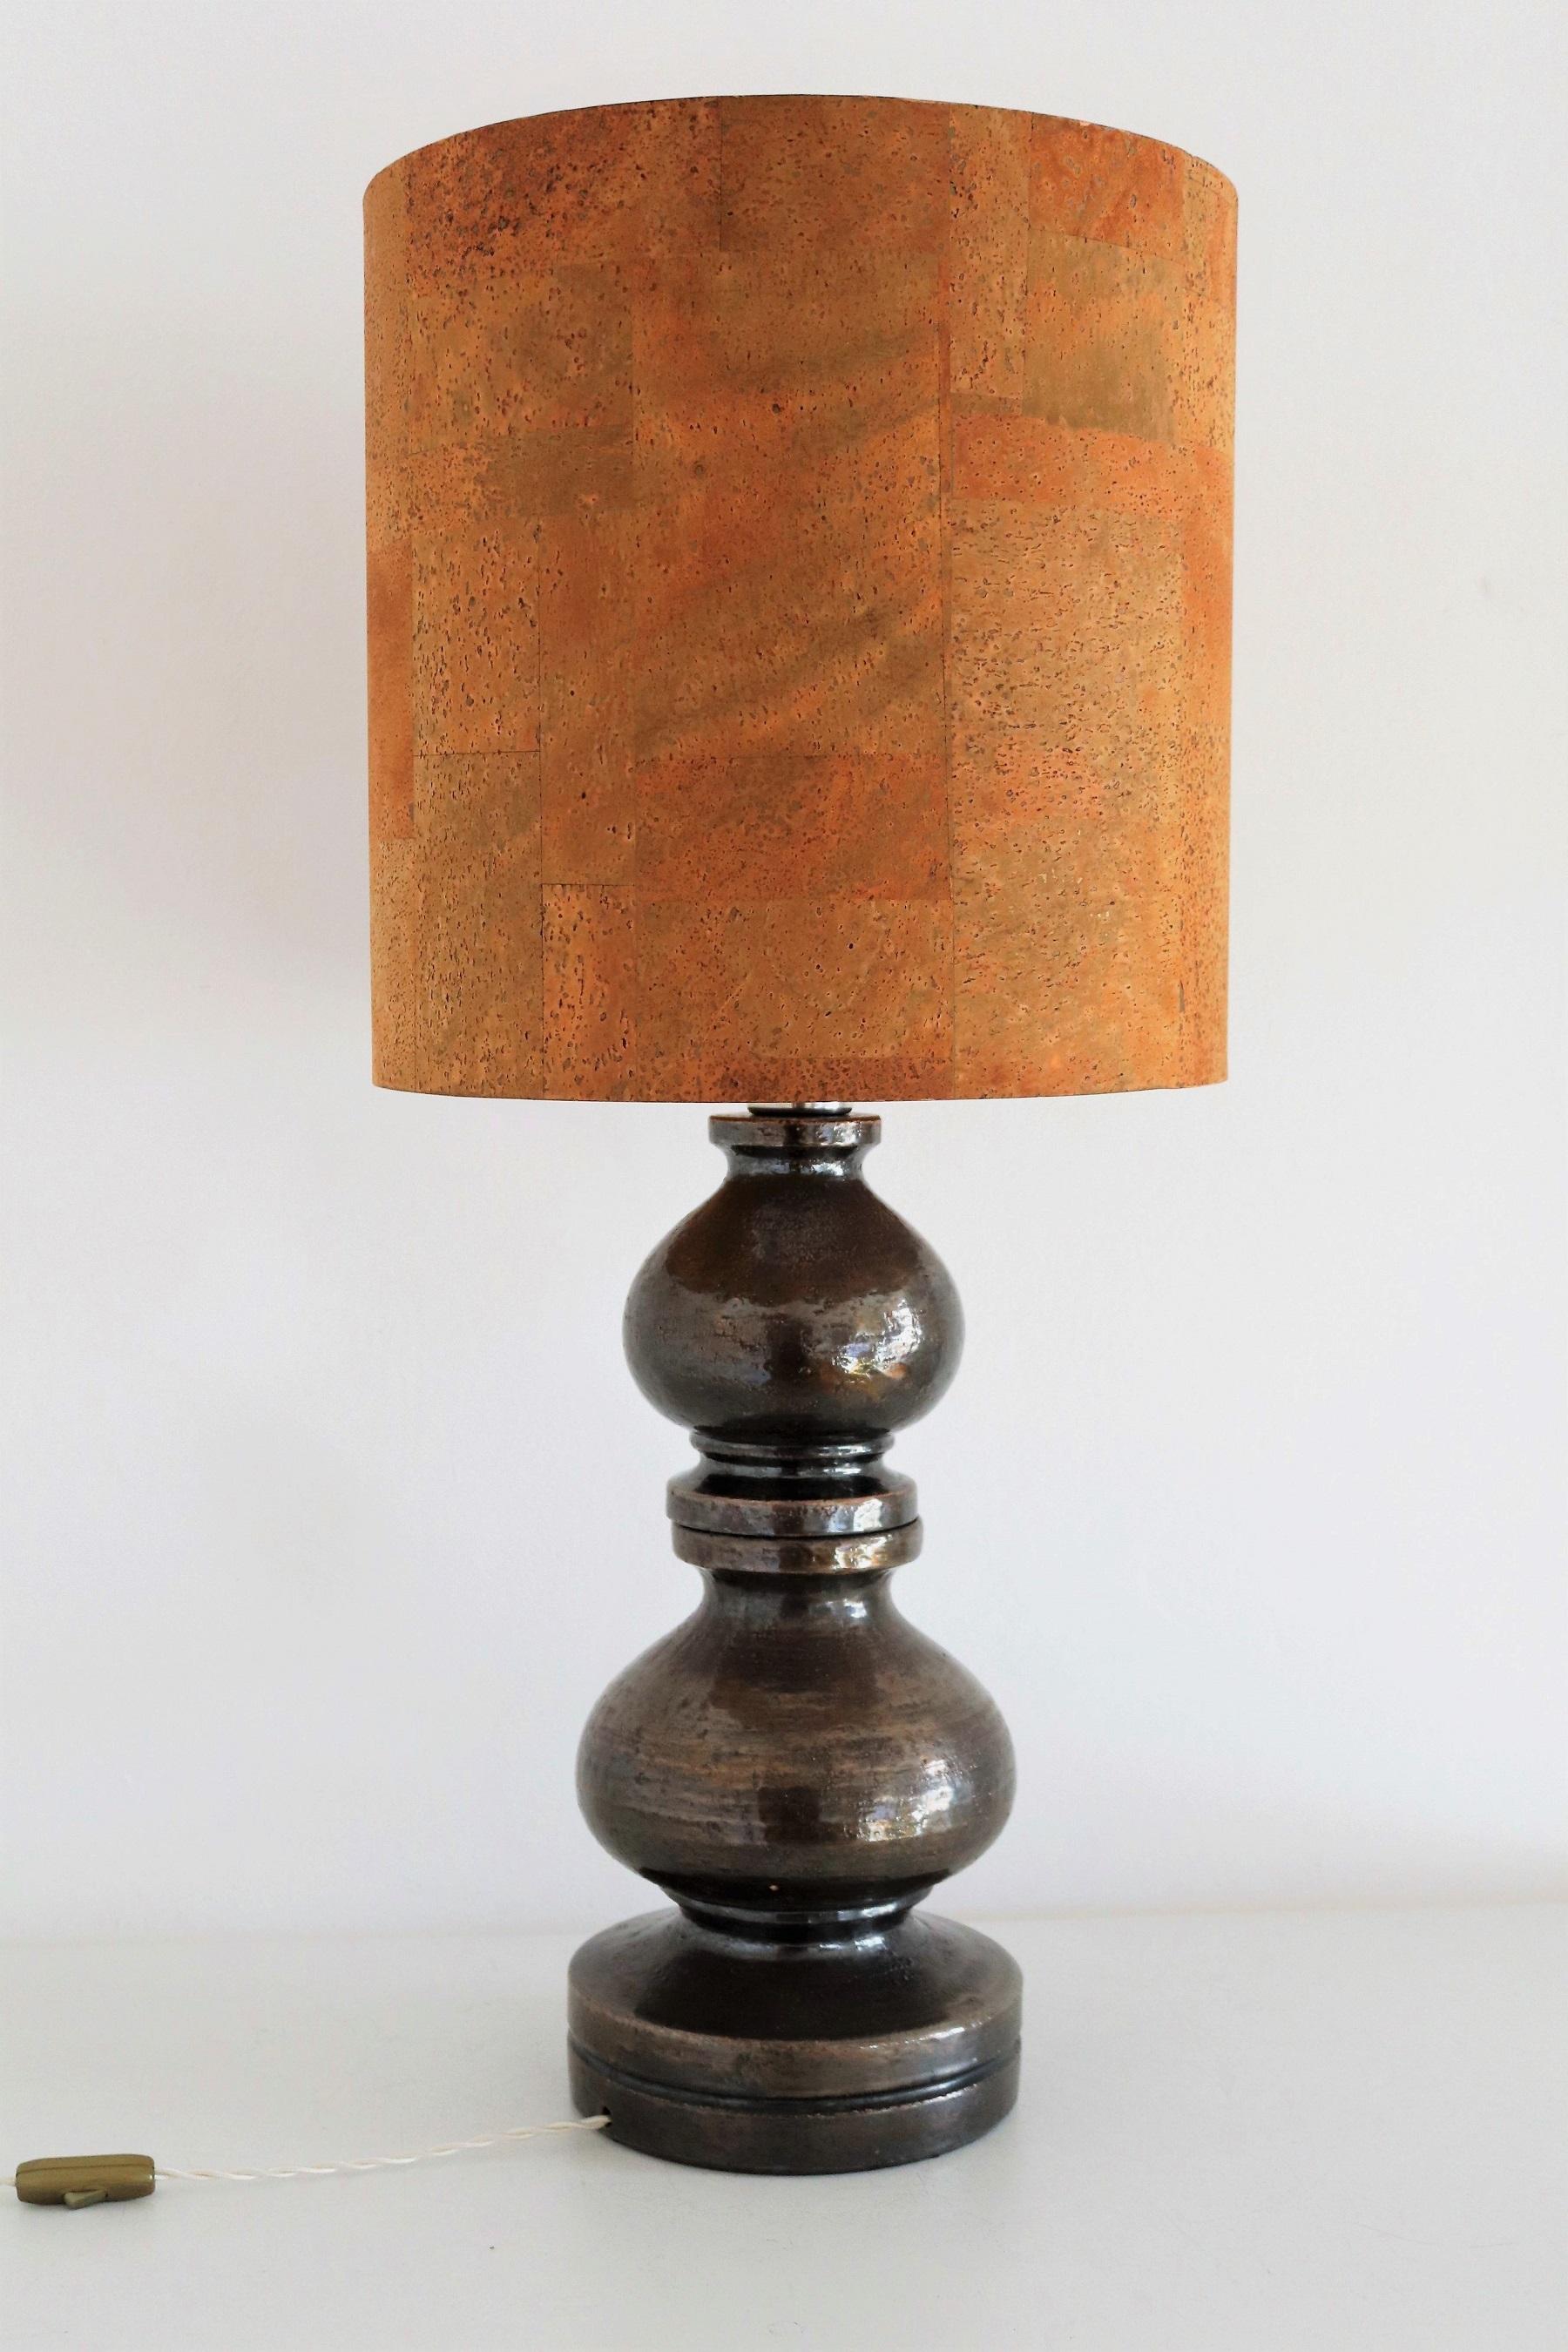 Gorgeous tall table lamp handmade of big and heavy ceramic base in dark anthracite - brown color.
Designed by Aldo Londi and produced by Bitossi of Montelupo Fiorentino, Italy, in the 1960s.
The lampshade is still the original in cork material, of